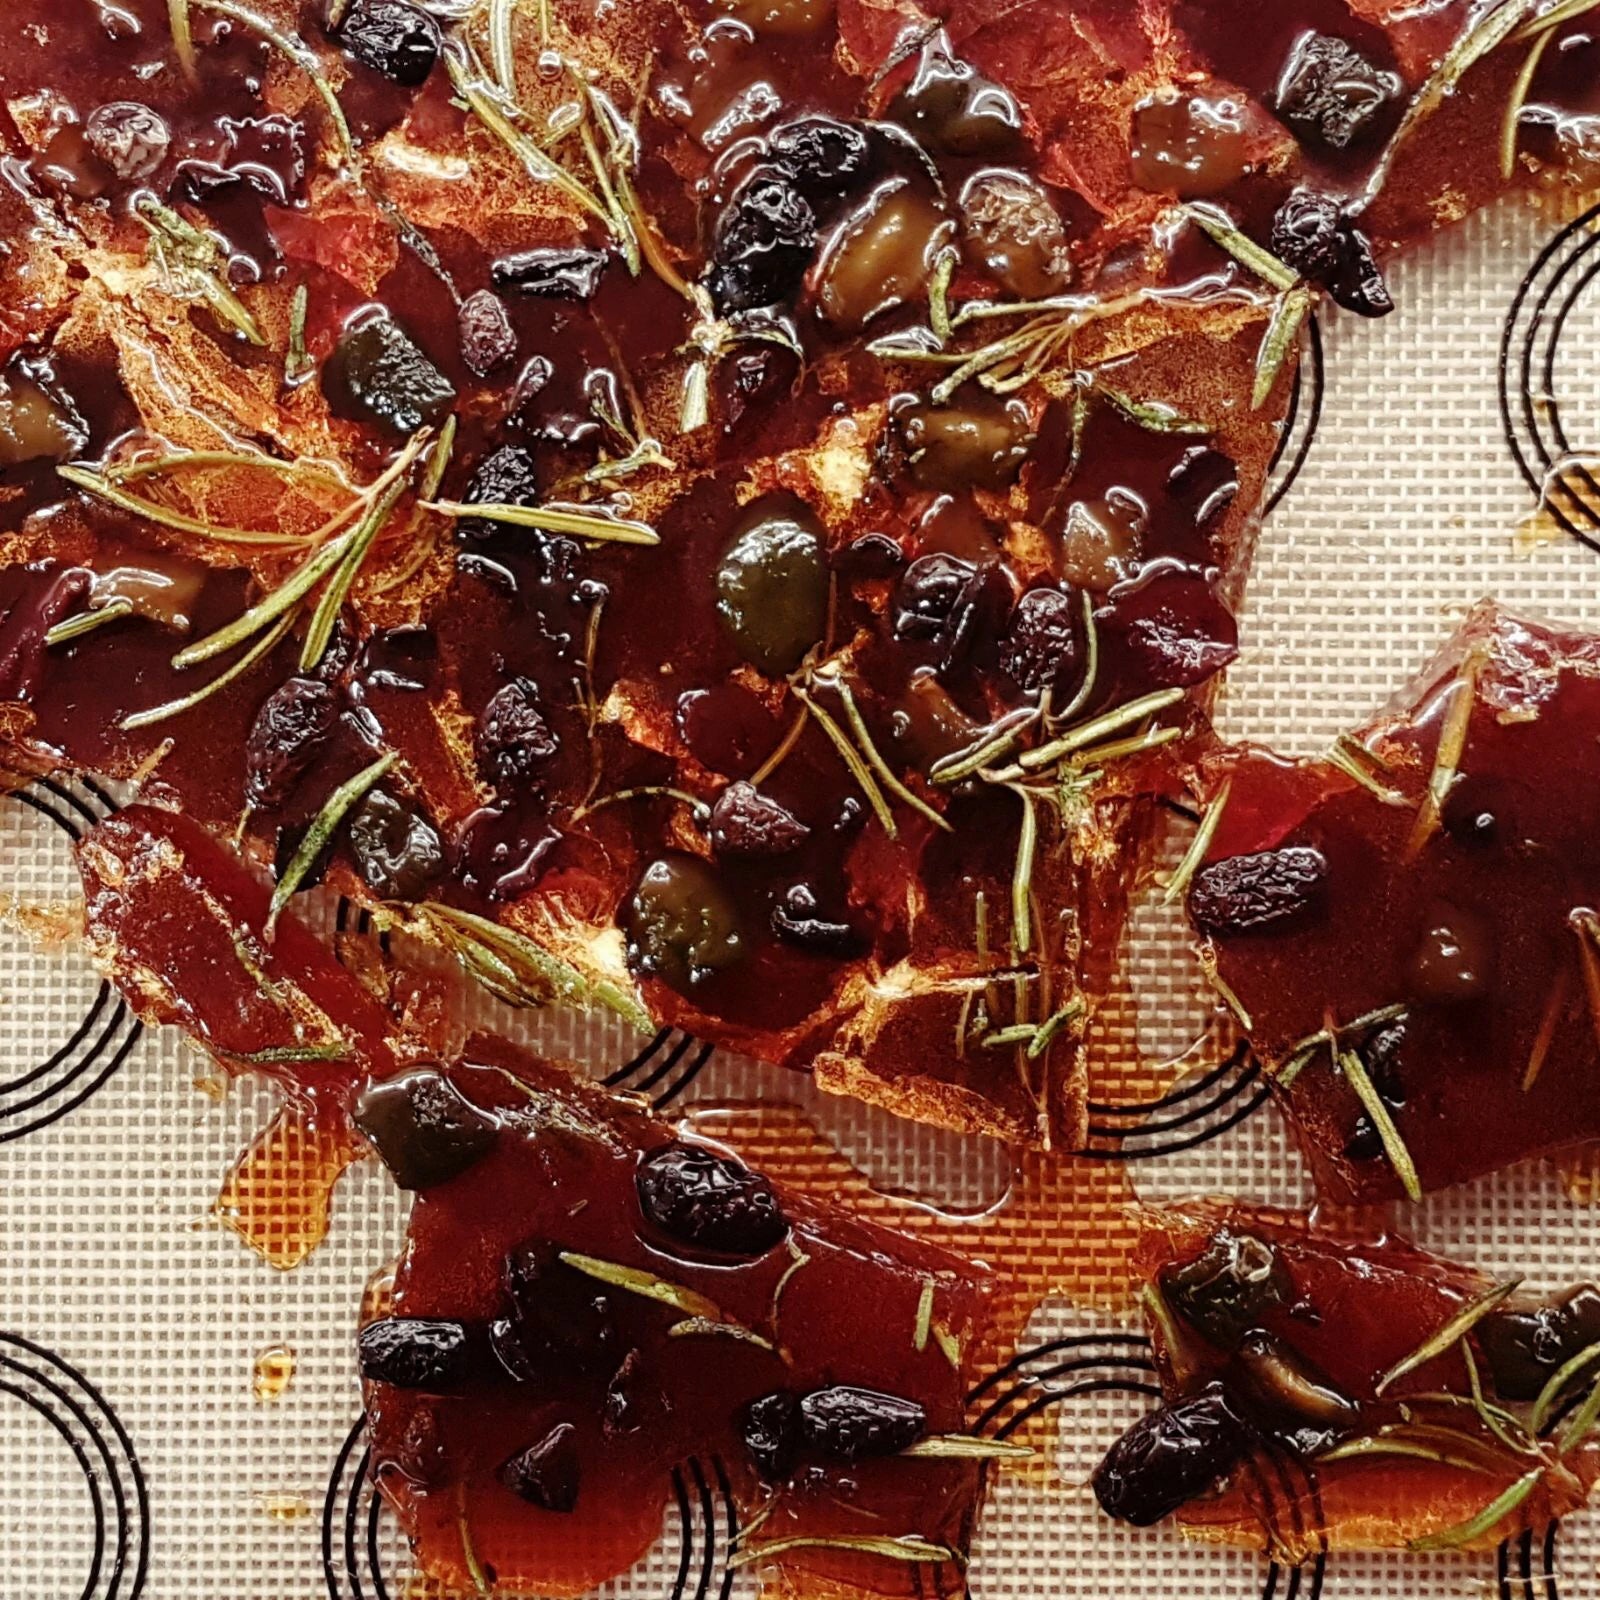 Bespoke olives and rosemary brittle